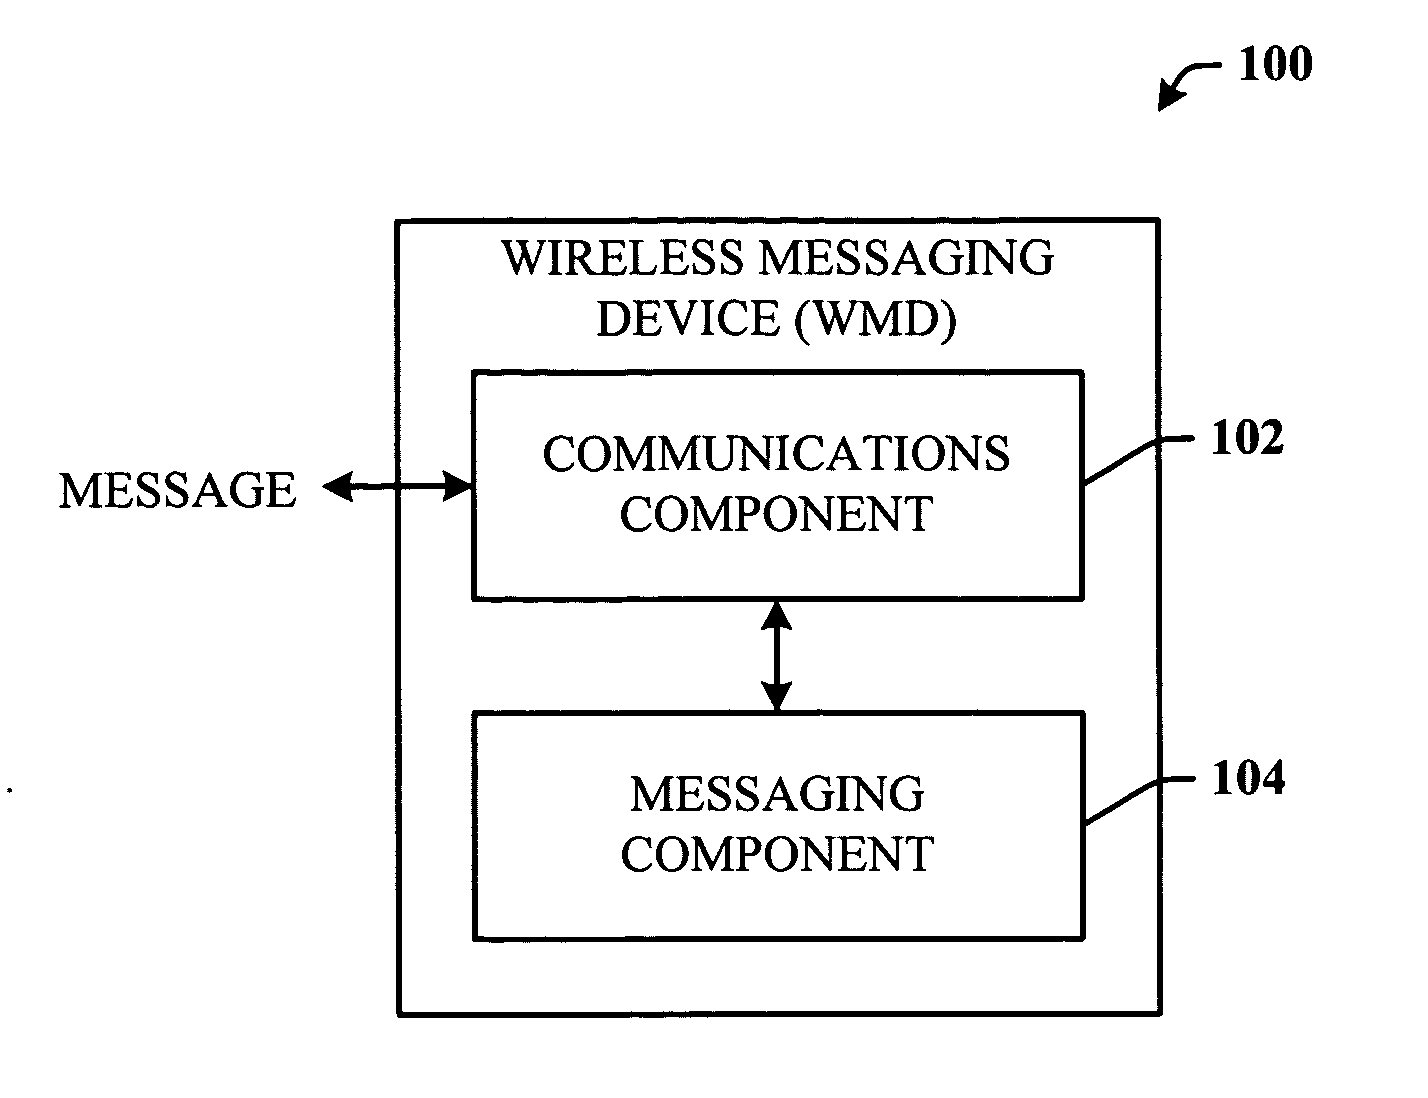 Always-on mobile instant messaging of a messaging centric wireless device